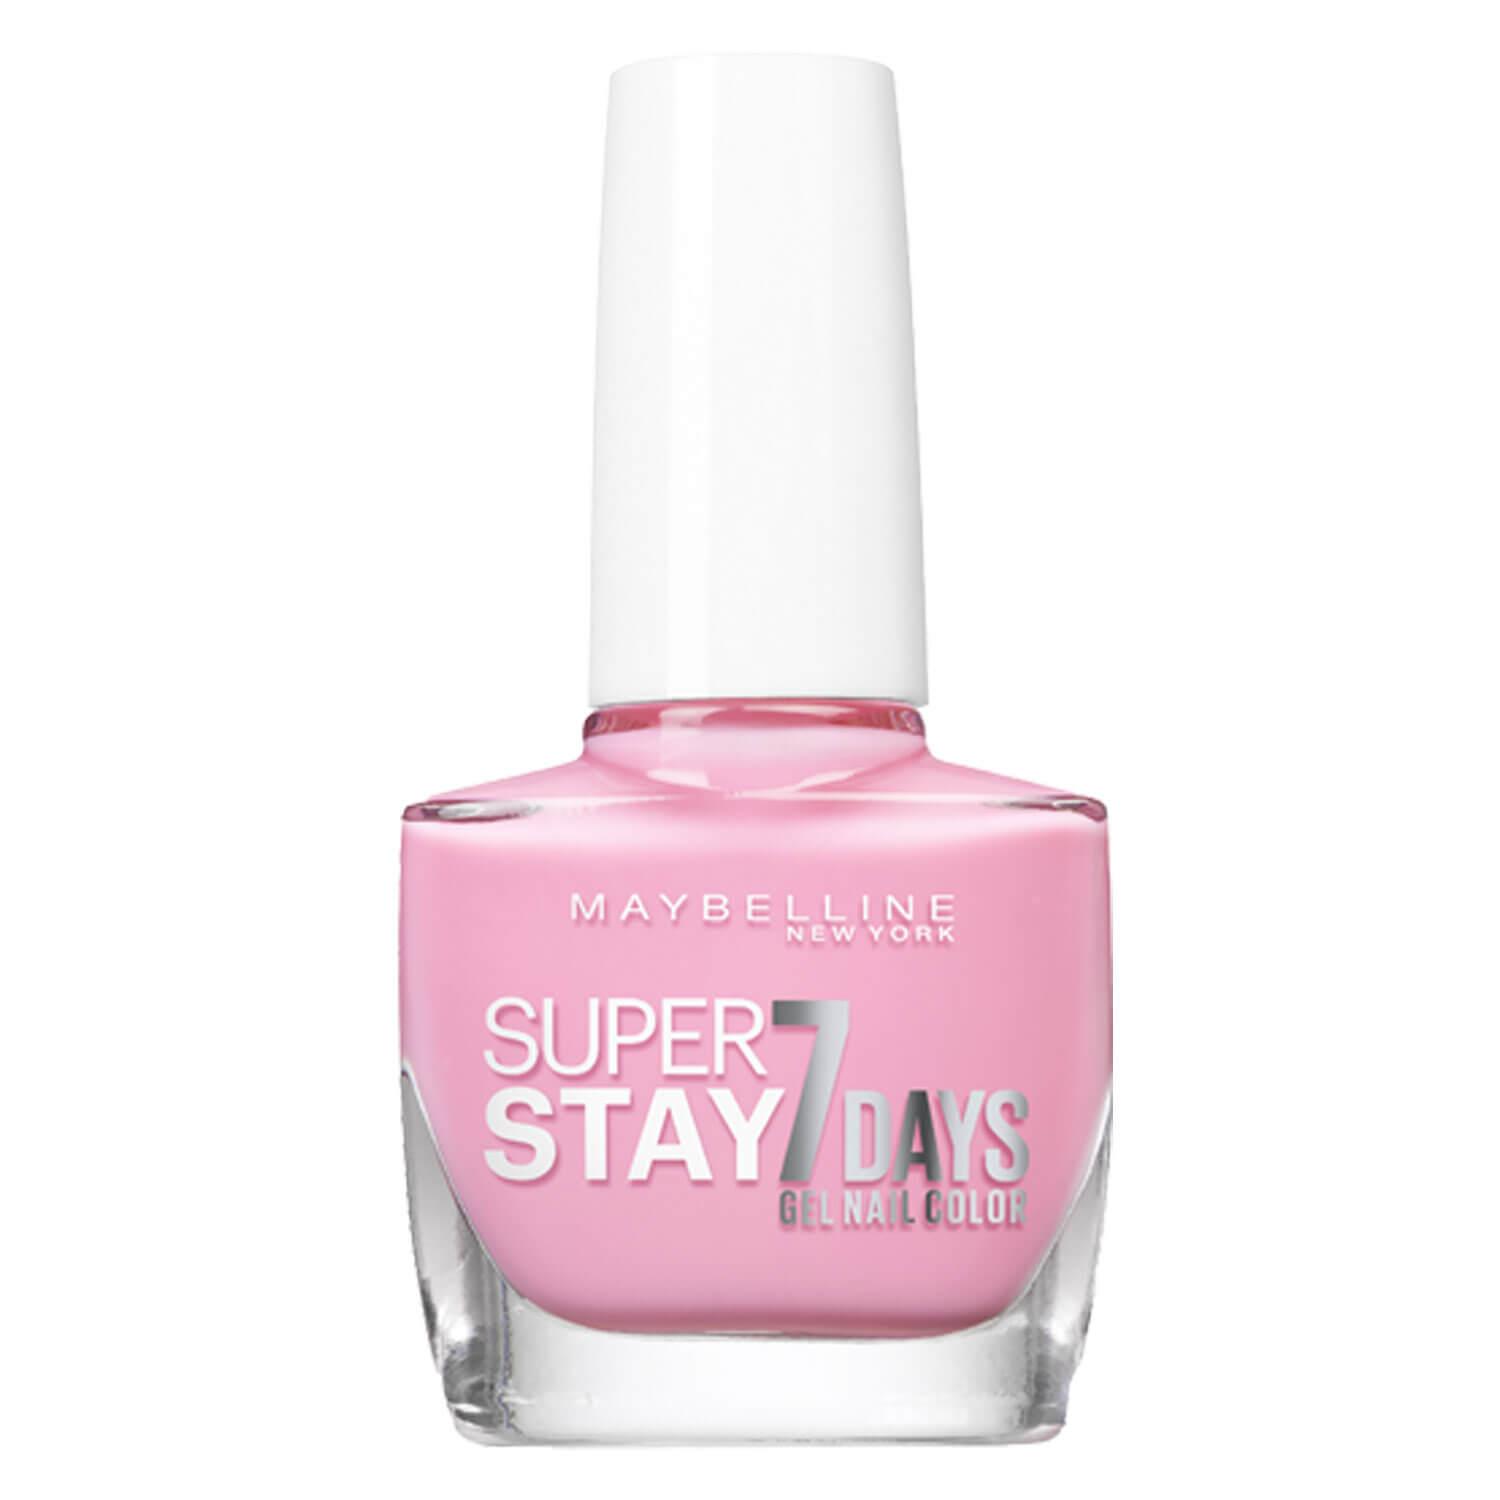 Maybelline NY Nails - Super Stay 7 Days Vernis à Ongles 120 Flushed Pink